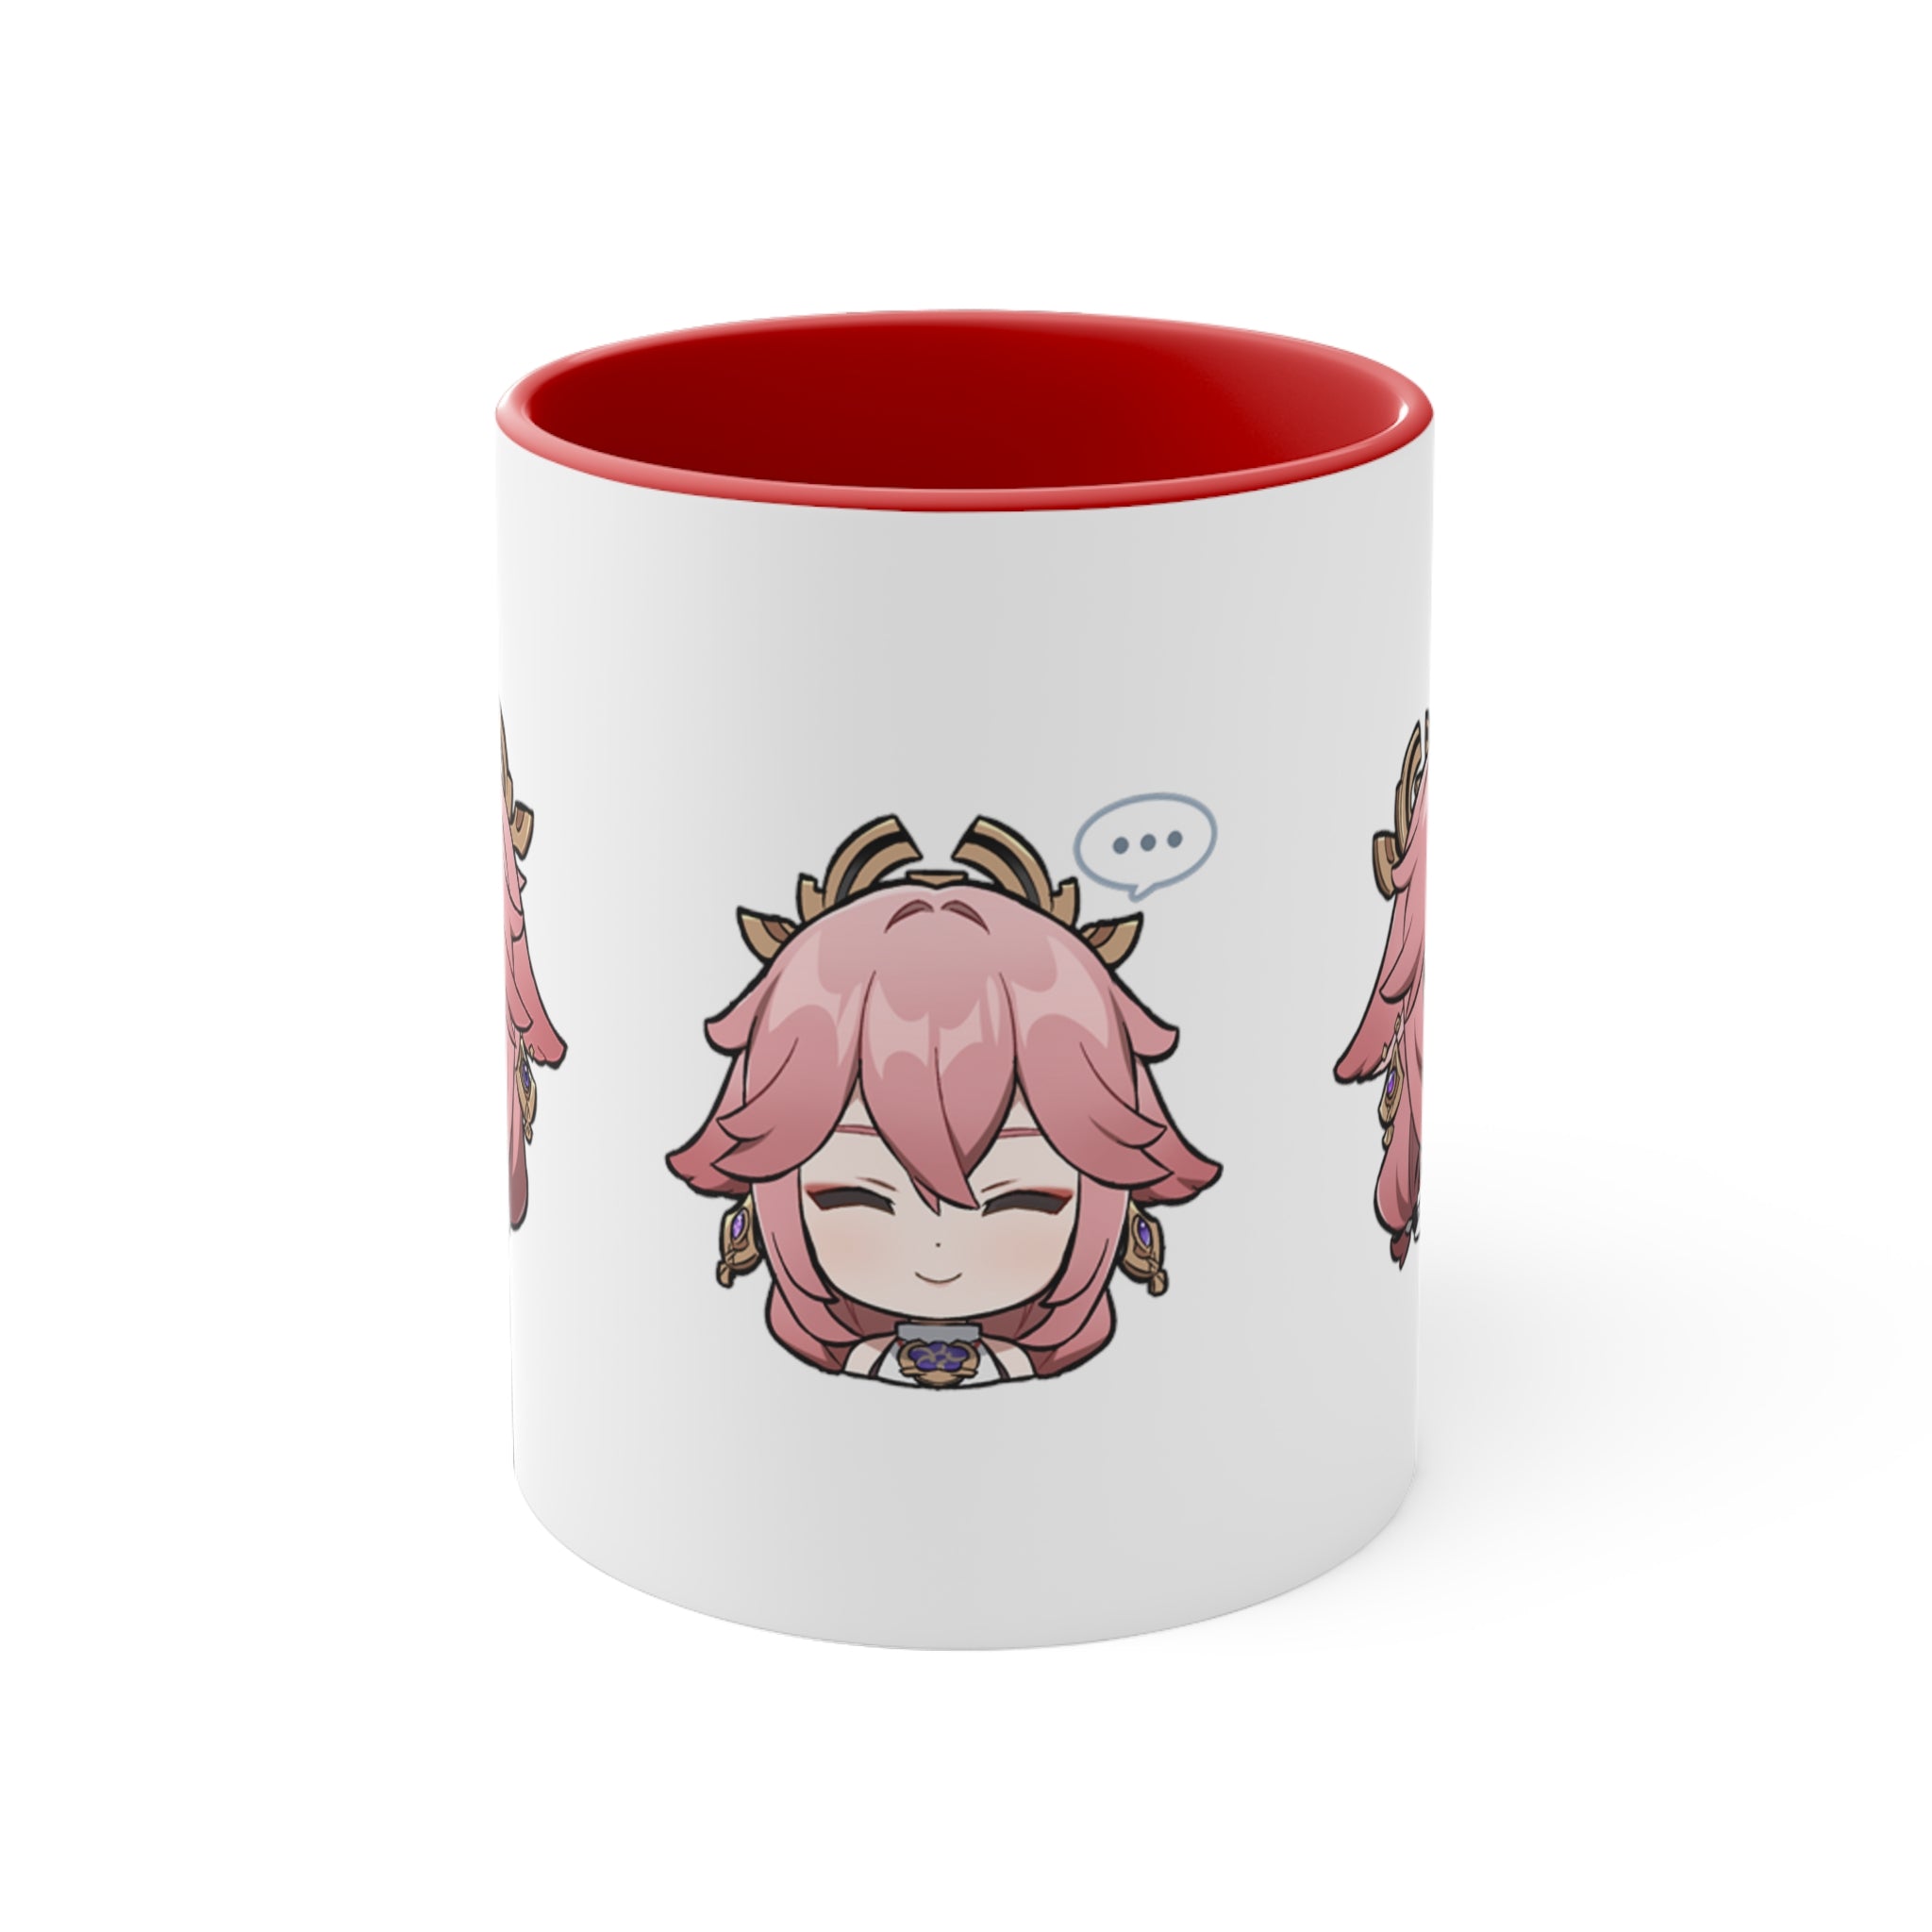 Yae Miko Genshin Impact Accent Coffee Mug, 11oz Cups Mugs Cup Gift For Gamer Gifts Game Anime Fanart Fan Birthday Valentine's Christmas